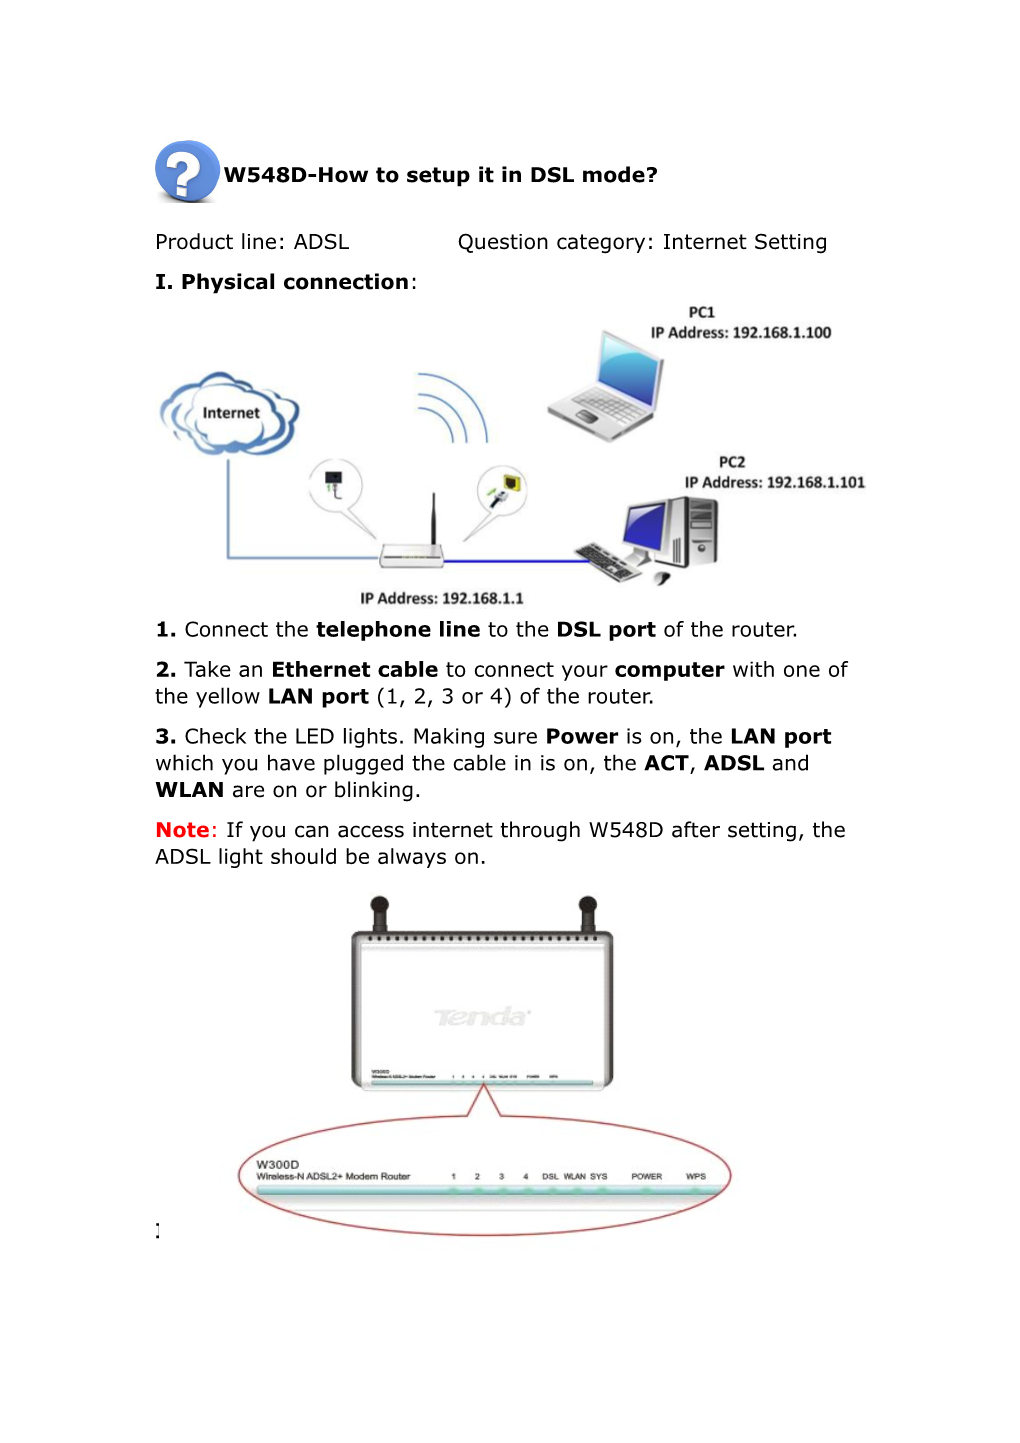 Product Line: ADSL Question Category: Internet Setting